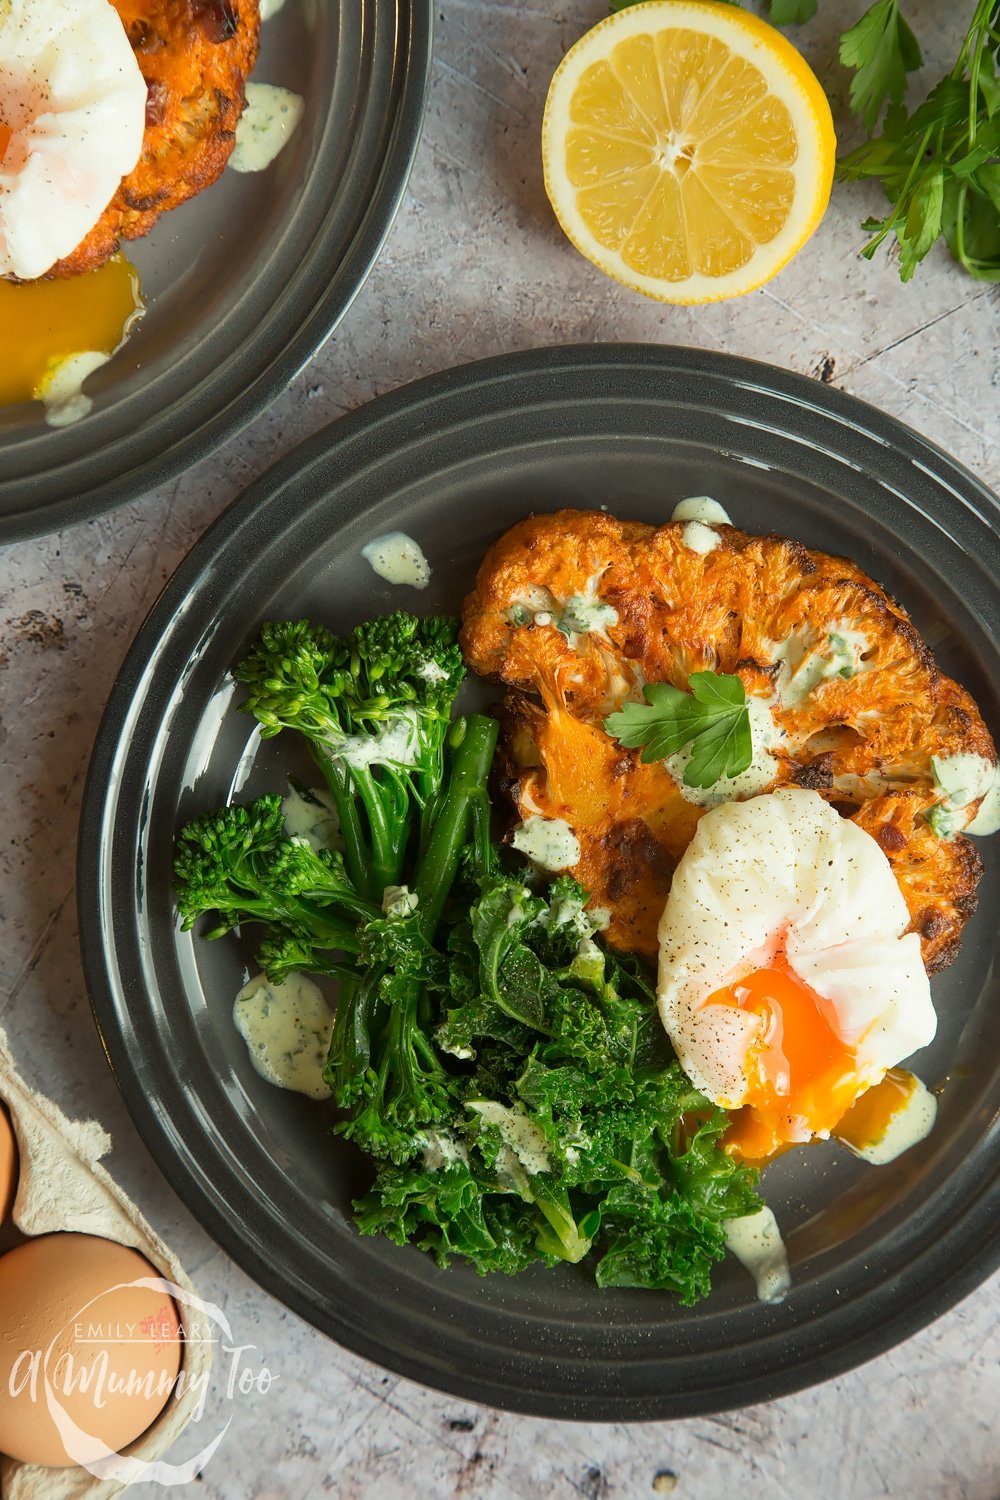 This cauliflower "steak" and eggs breakfast features sliced cauliflower marinated with harissa and goat's yogurt, for a delicious alternative to a traditional poached egg breakfast